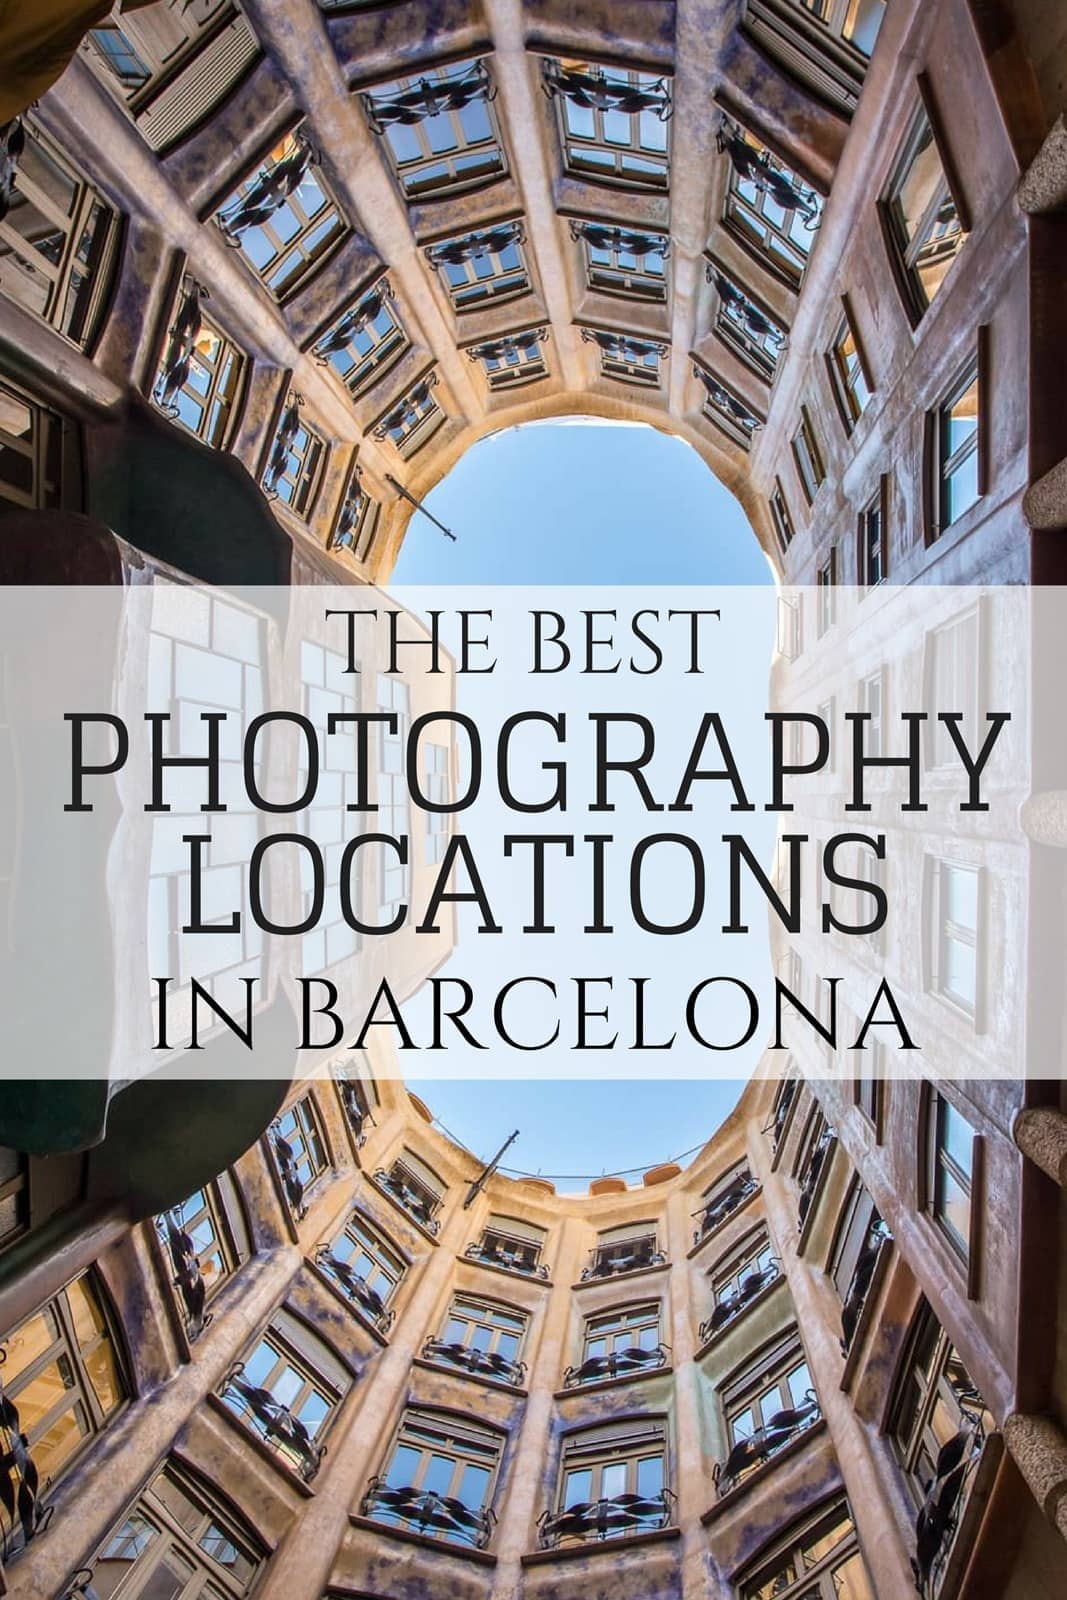 Best Photography Locations in Barcelona: Full list of some of the best photography locations in Barcelona to help you get the best photos from your trip to the city. Also includes tips for getting around Barcelona, finding accommodation in Barcelona and more!